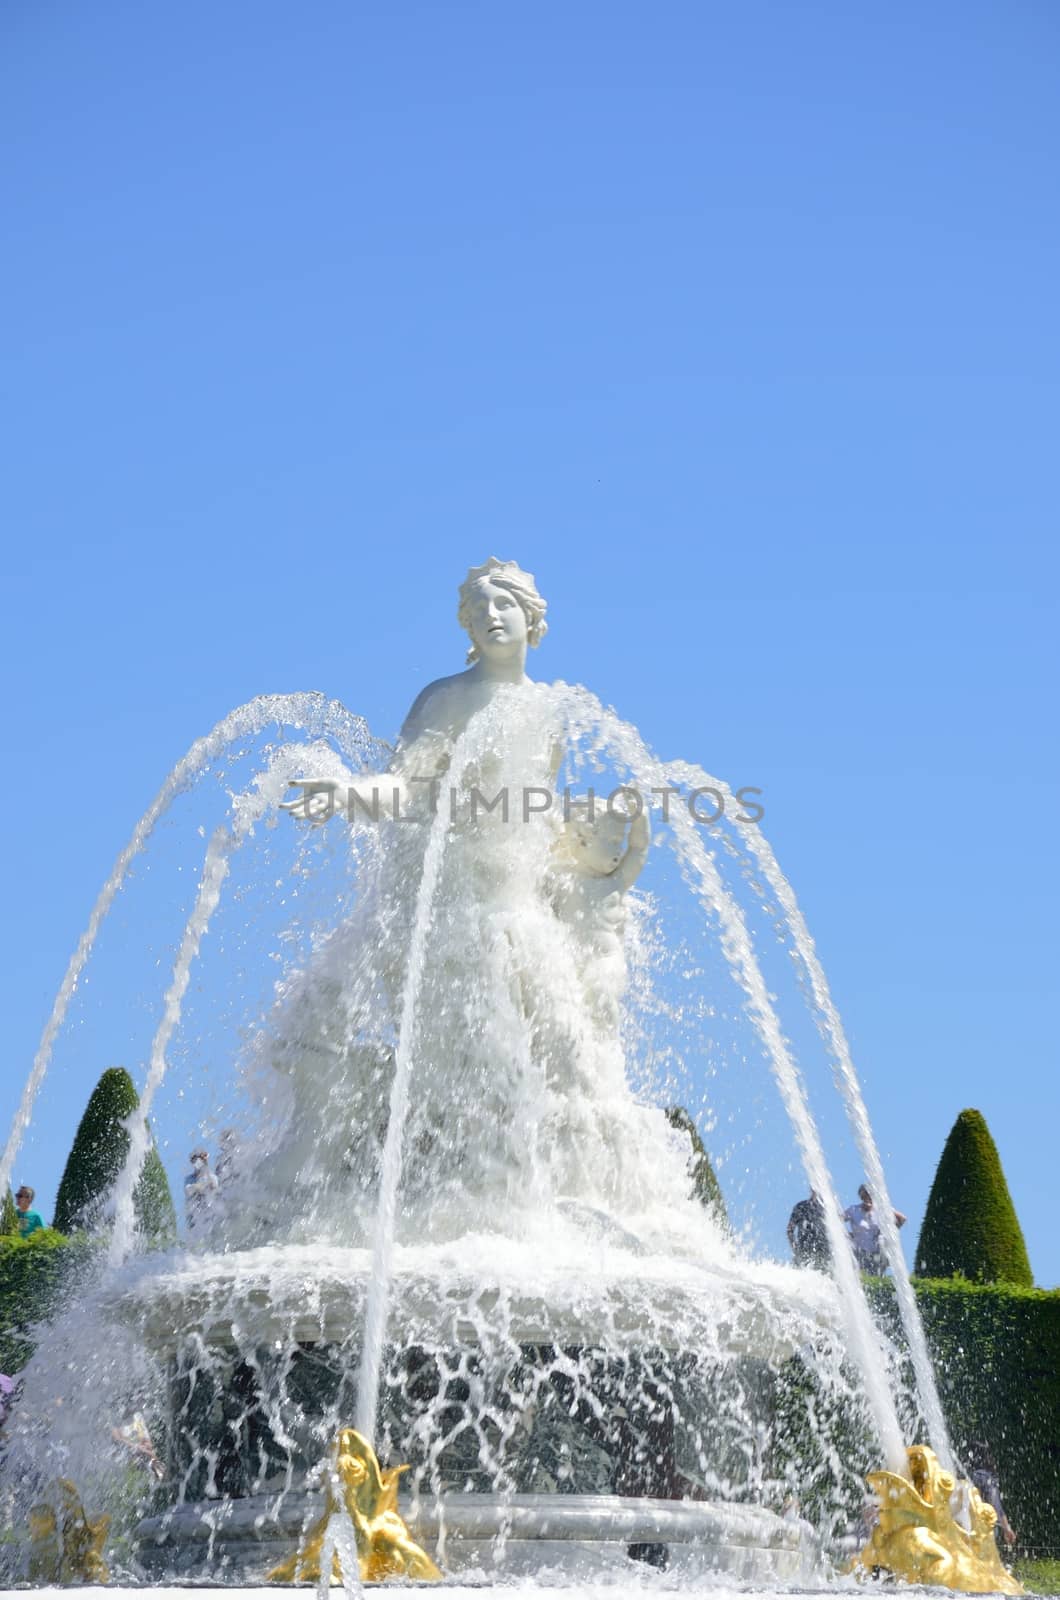 Classical fountain figure by pauws99